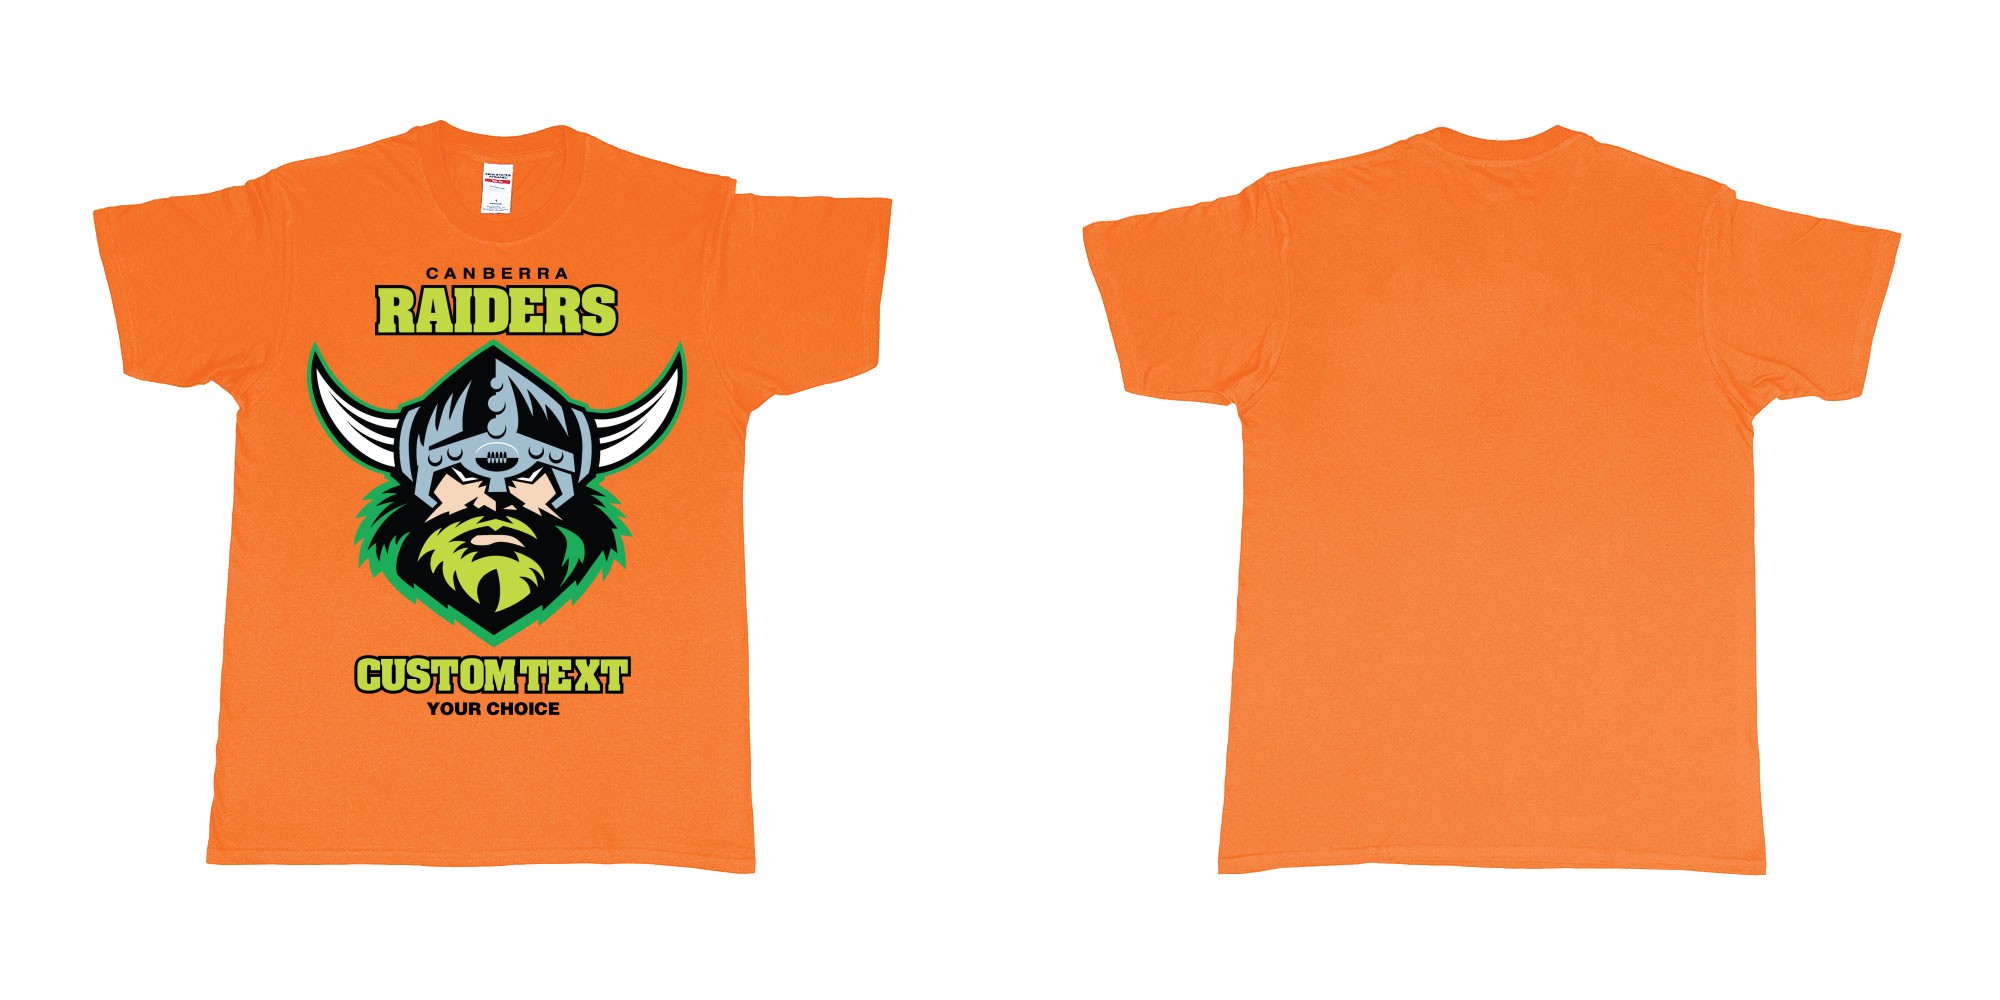 Custom tshirt design canberra raiders nrl logo own printed text near you in fabric color orange choice your own text made in Bali by The Pirate Way